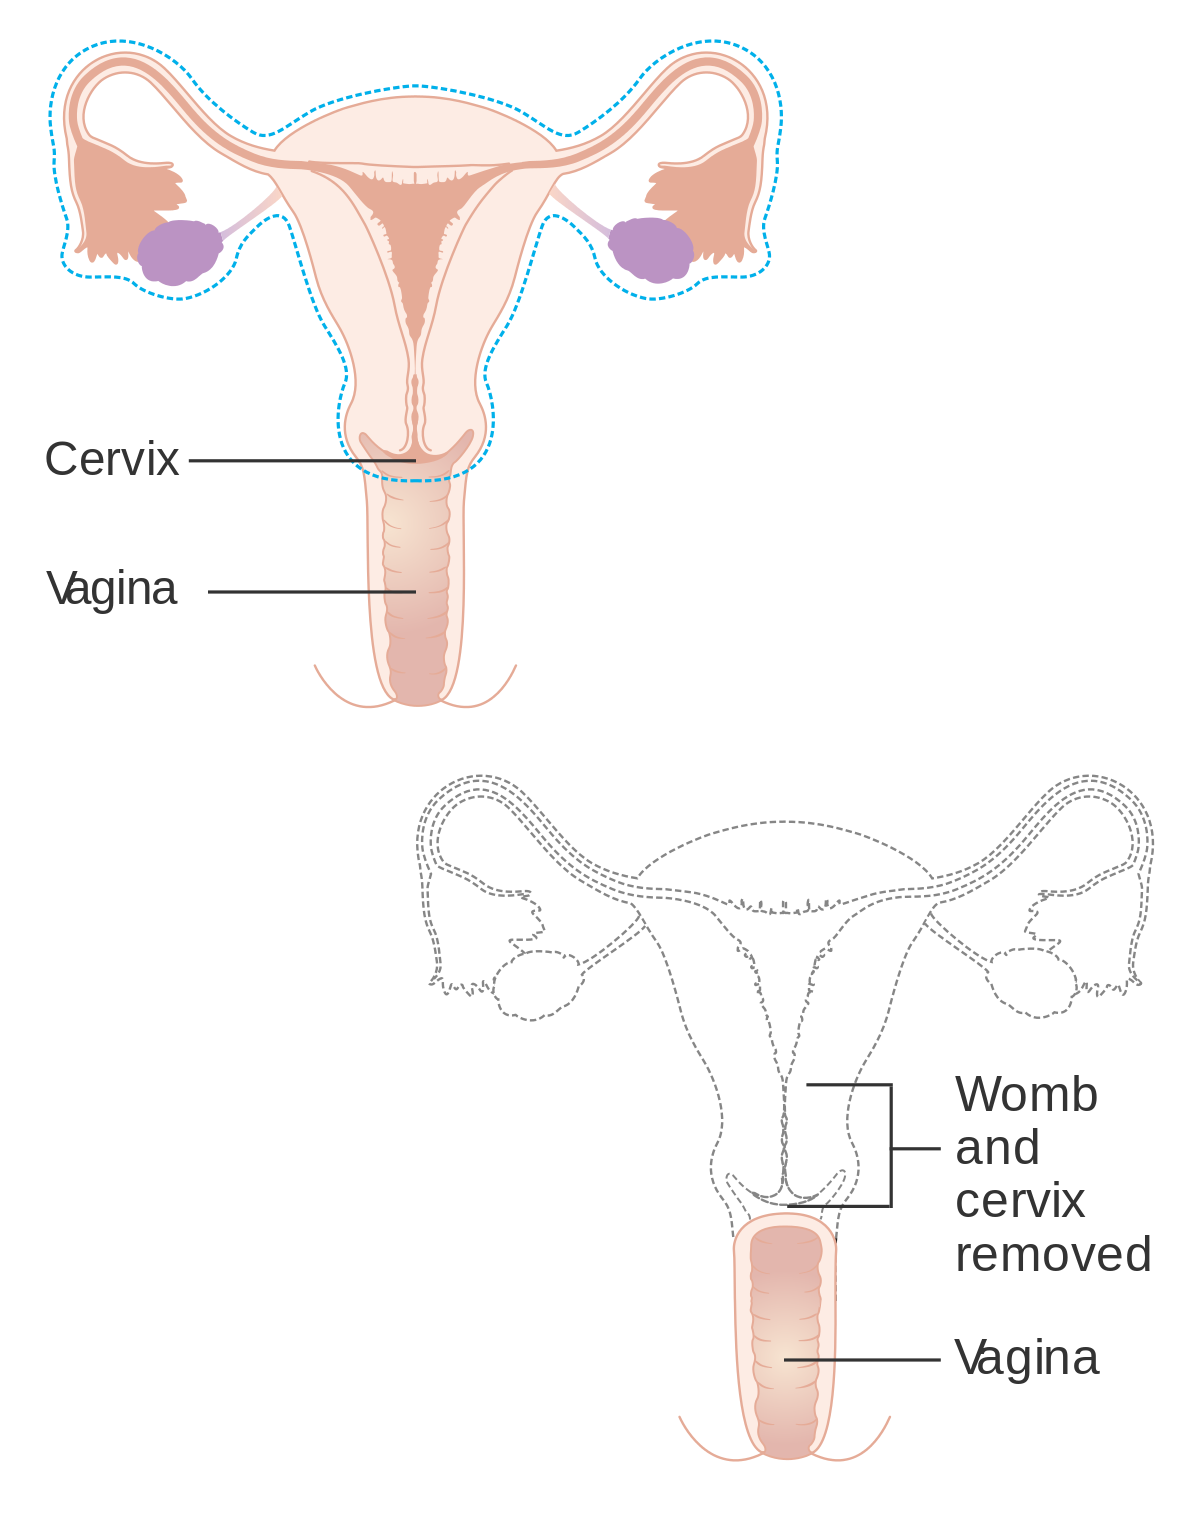 Womb cervix free videos watch download and enjoy womb